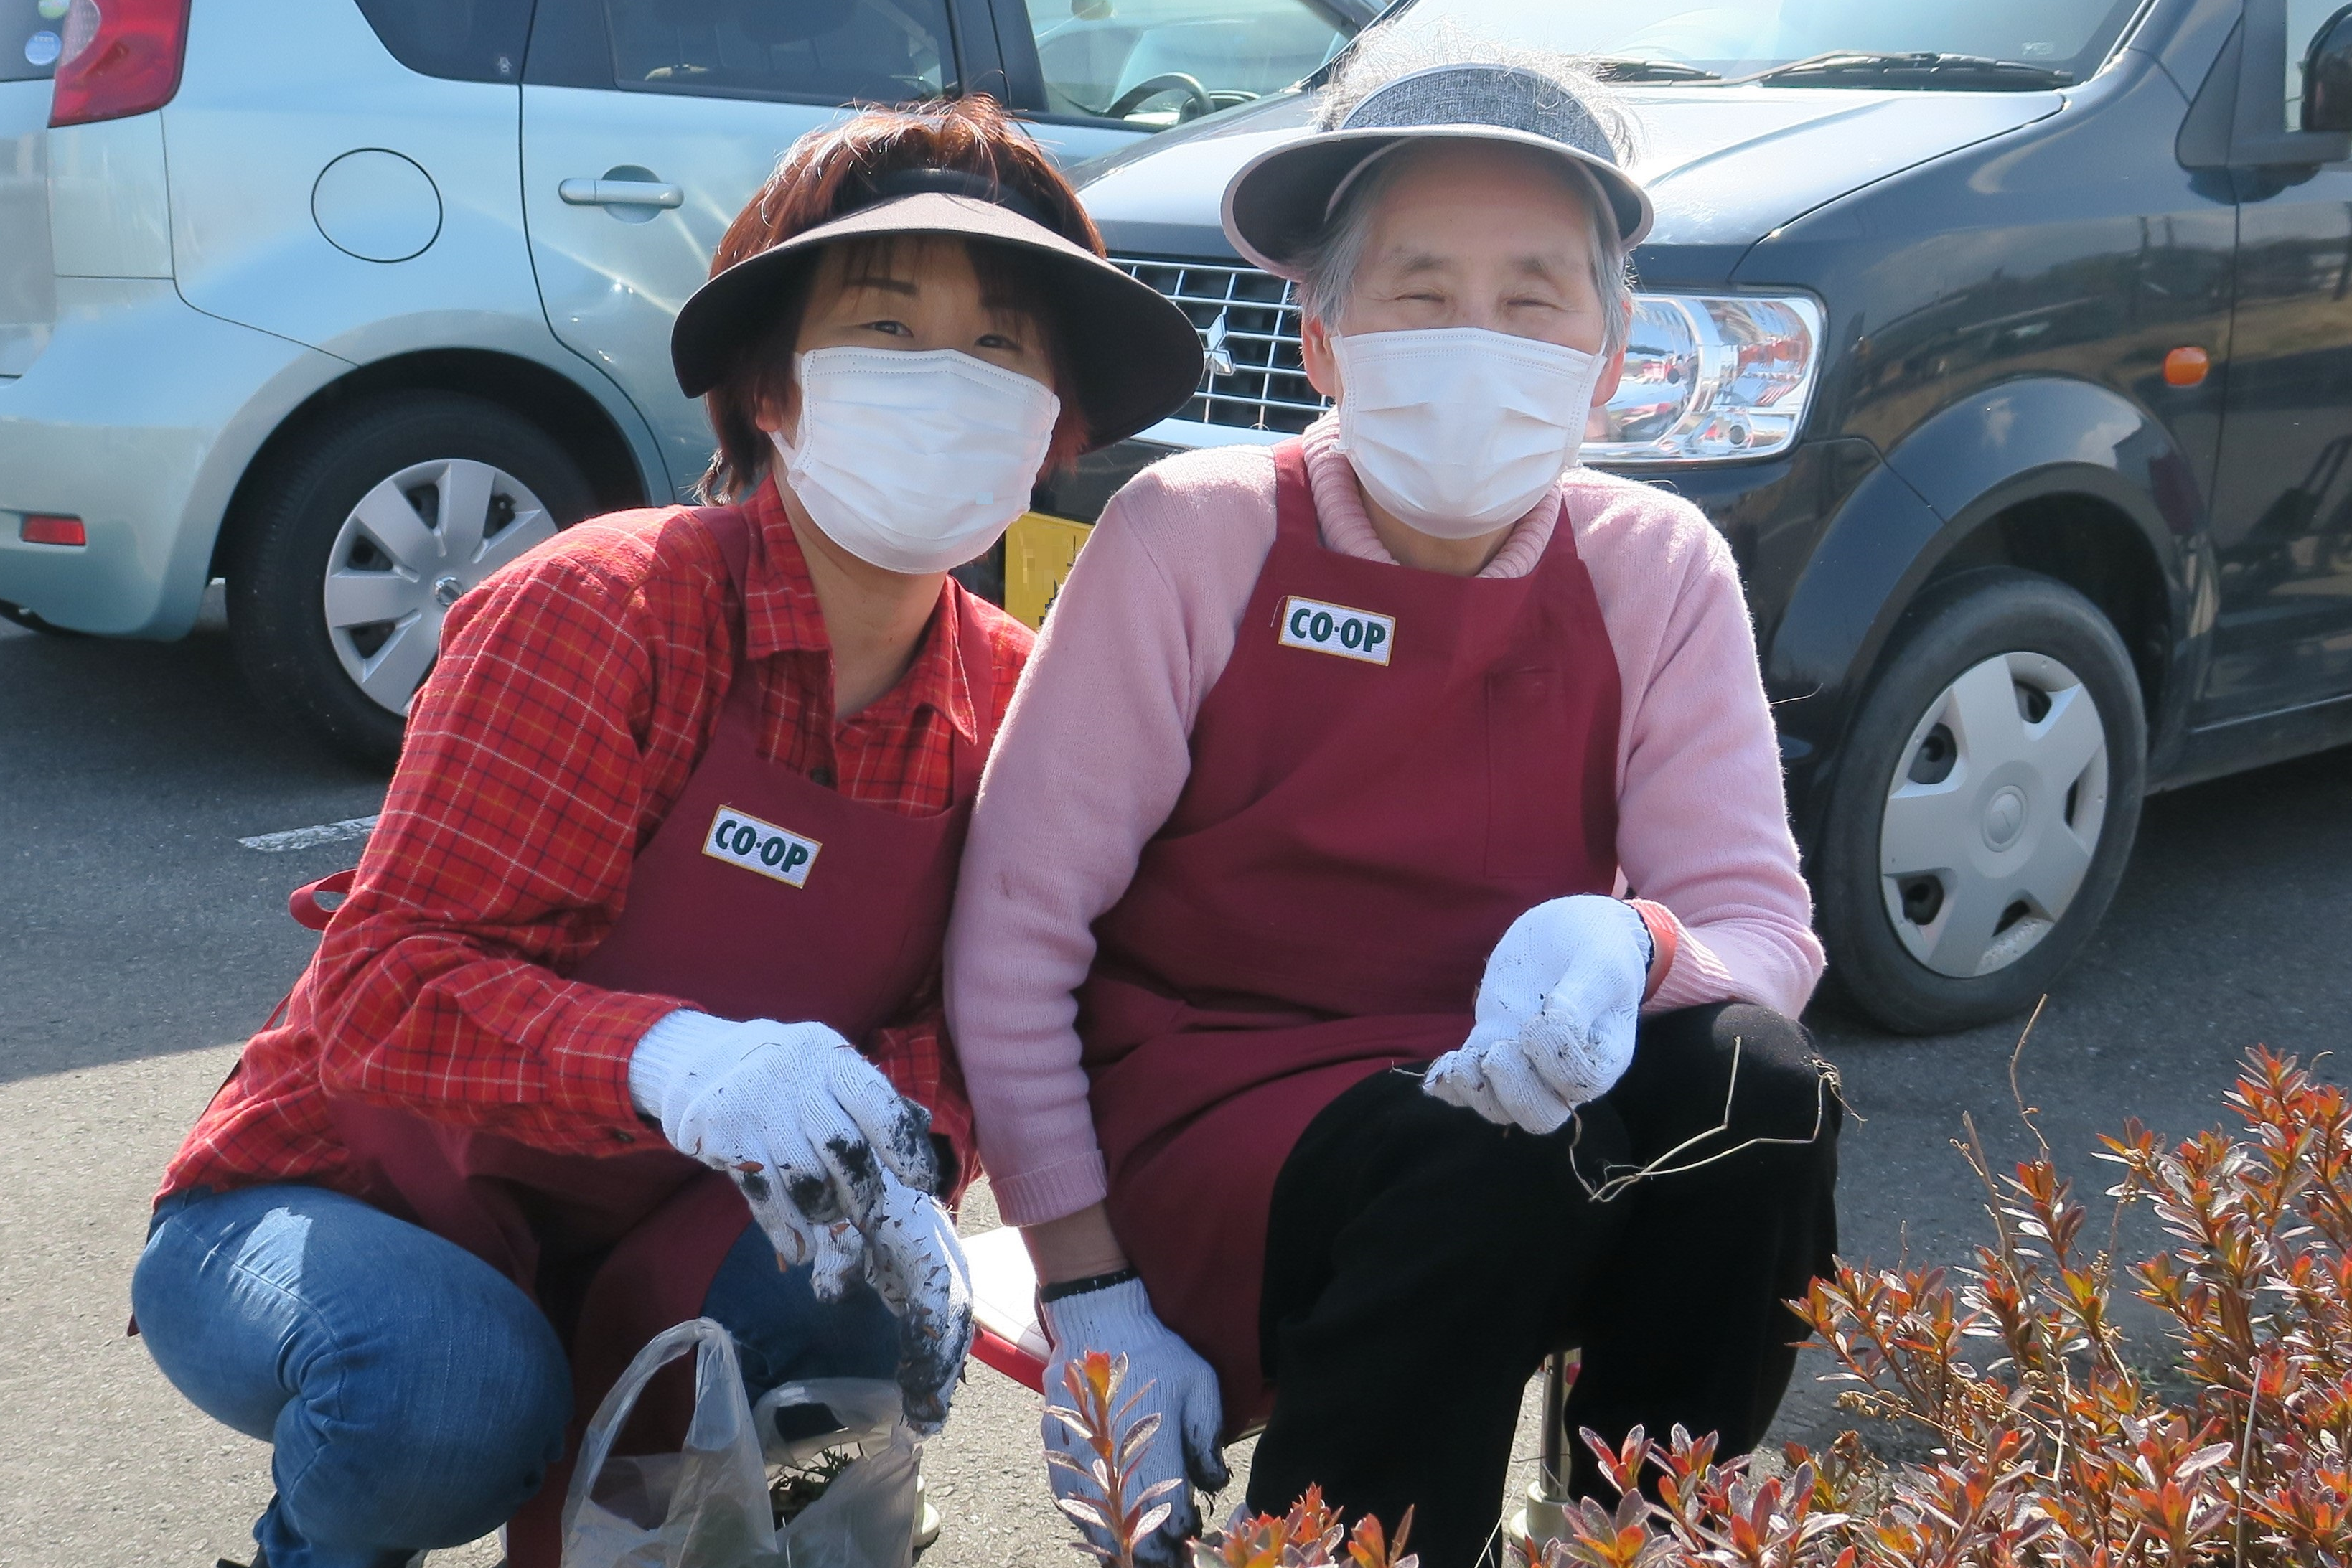 Project to support the social participation of the elderly by Okayama Co-op